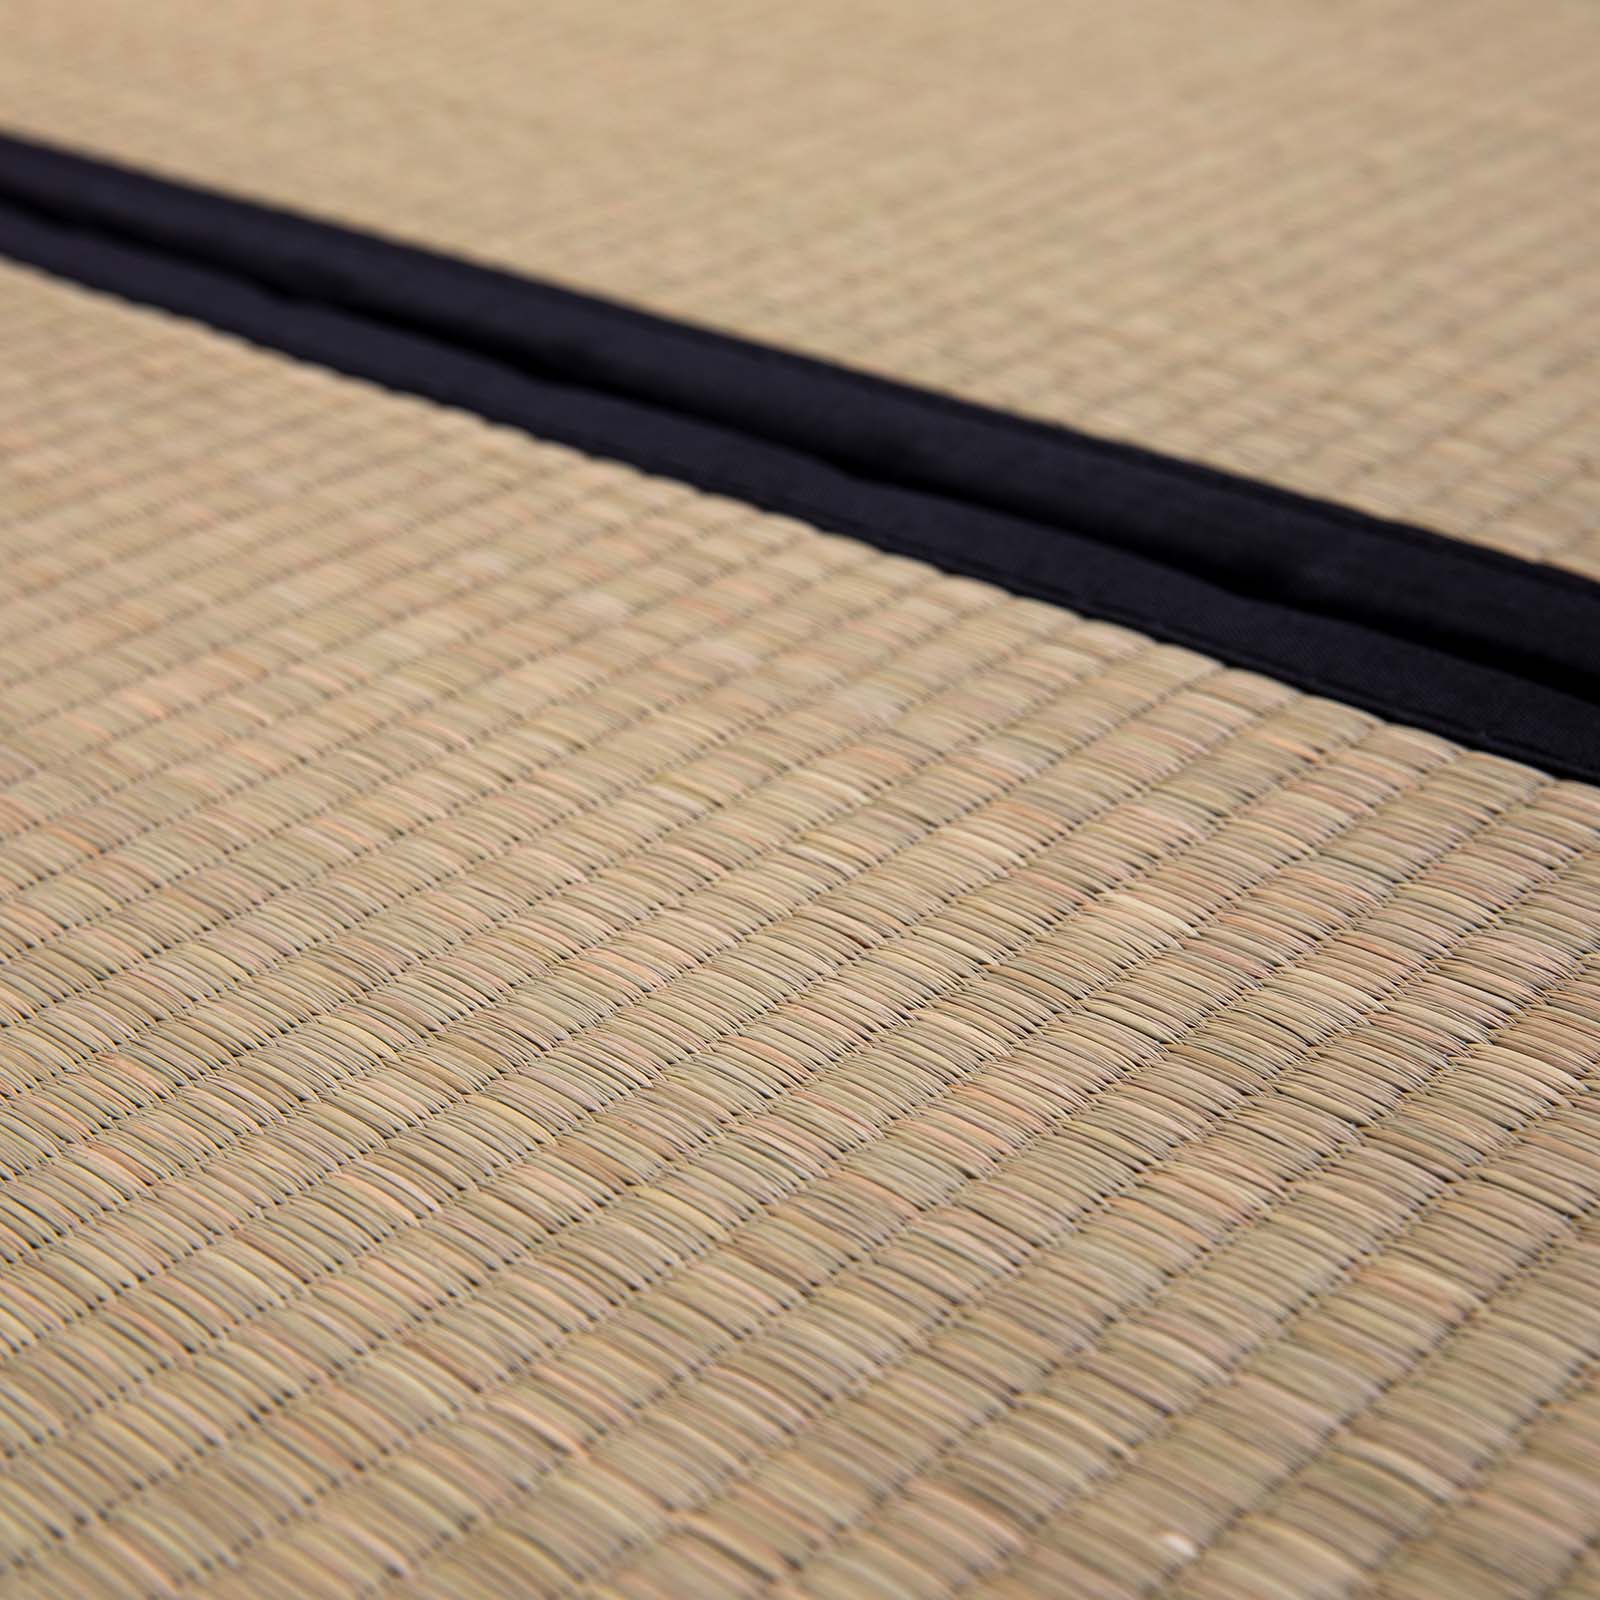 The goza carpet is made entirely of the surface portion of tatami mats. -  Japanese Tatami Room